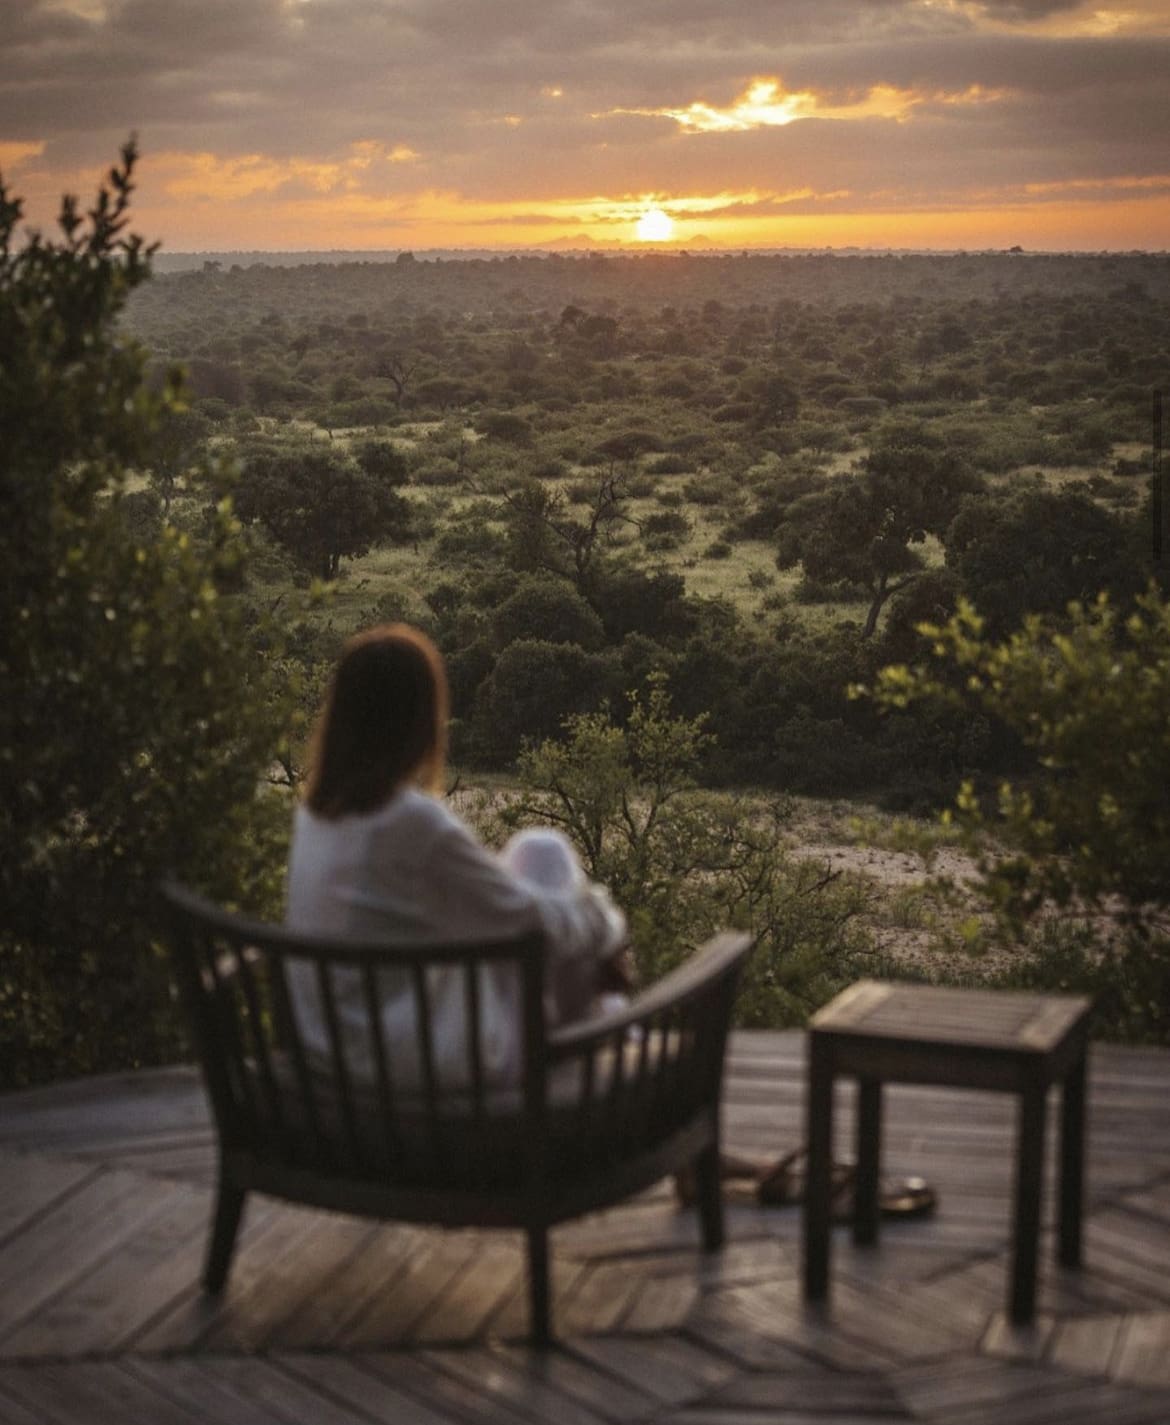 Watching the sunset, Kruger National Park